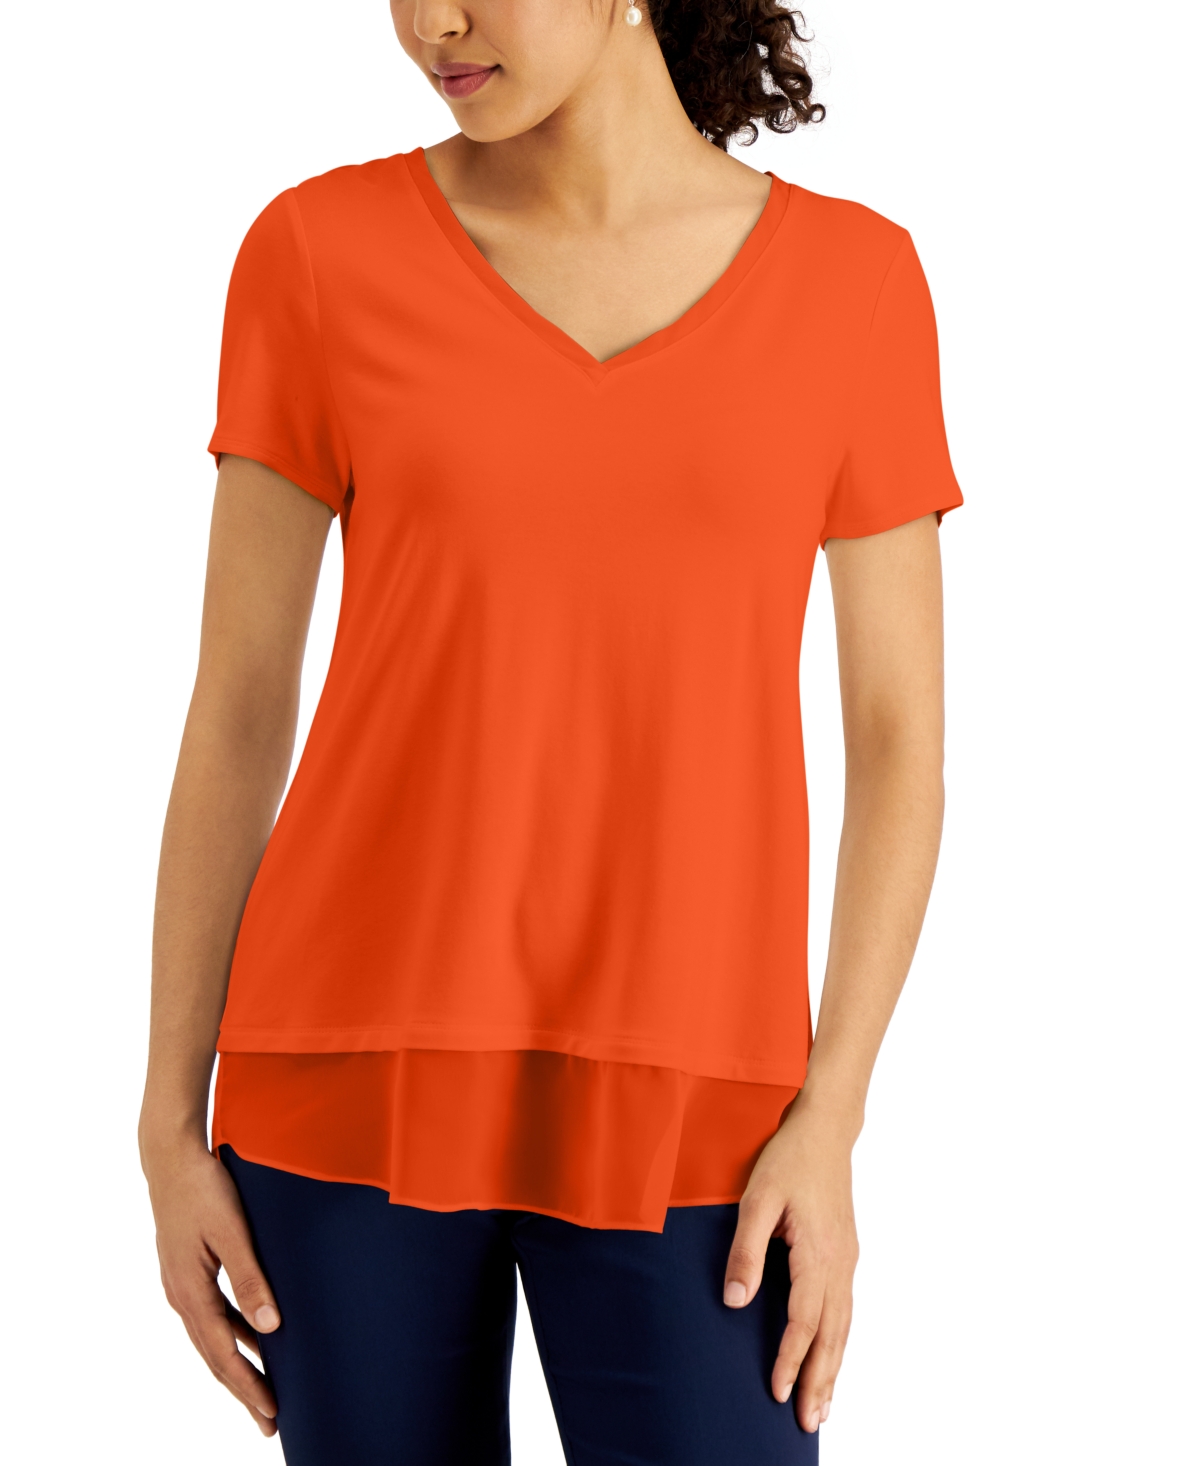 Jm Collection Plus Satin-Trim Top, Created for Macy's